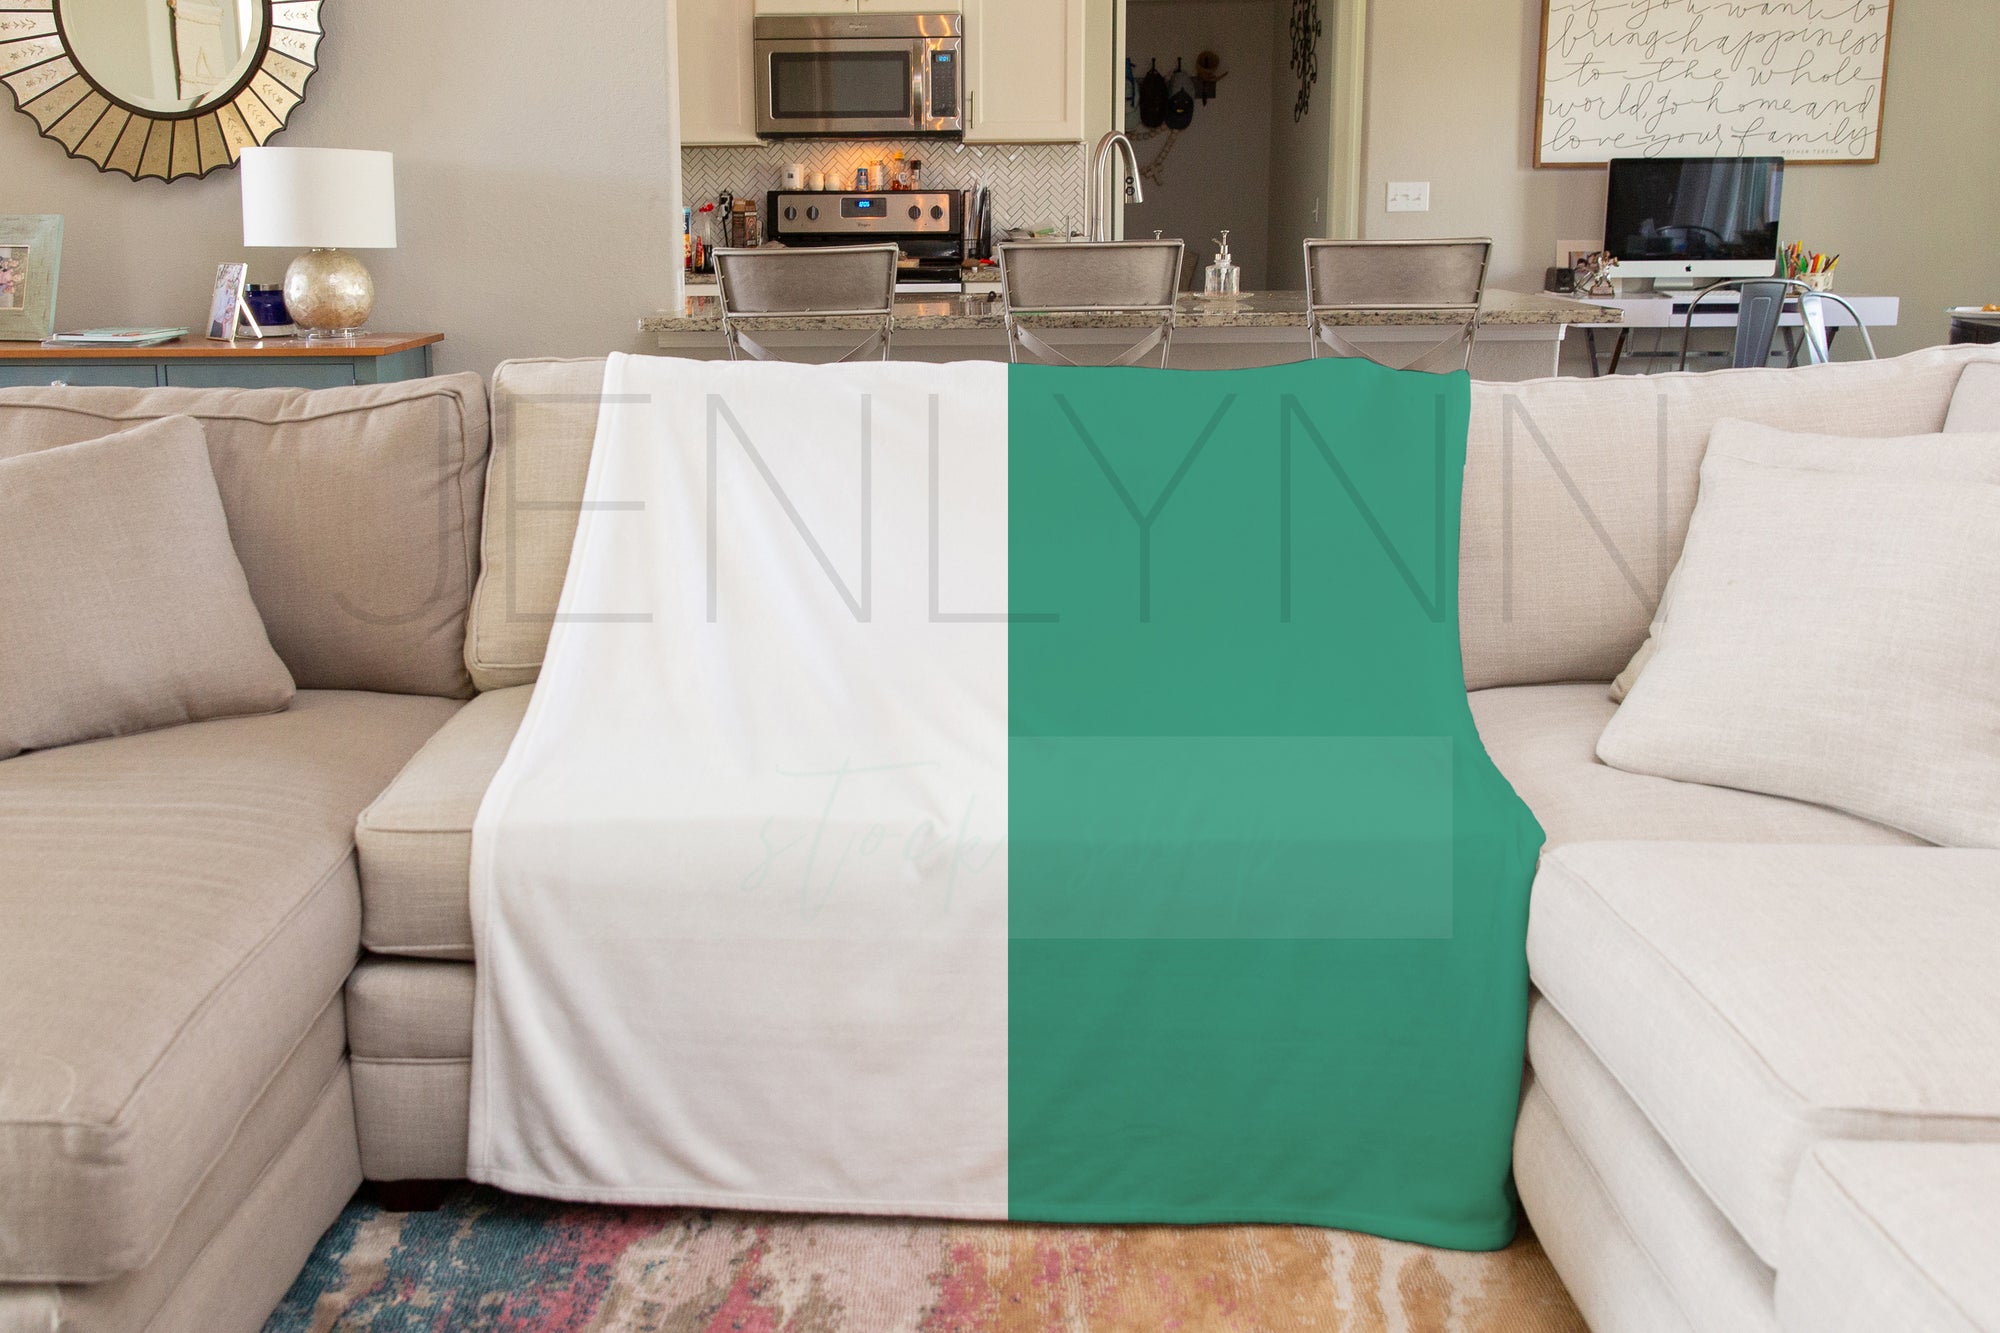 Minky Blanket on Couch Mockup #BH5